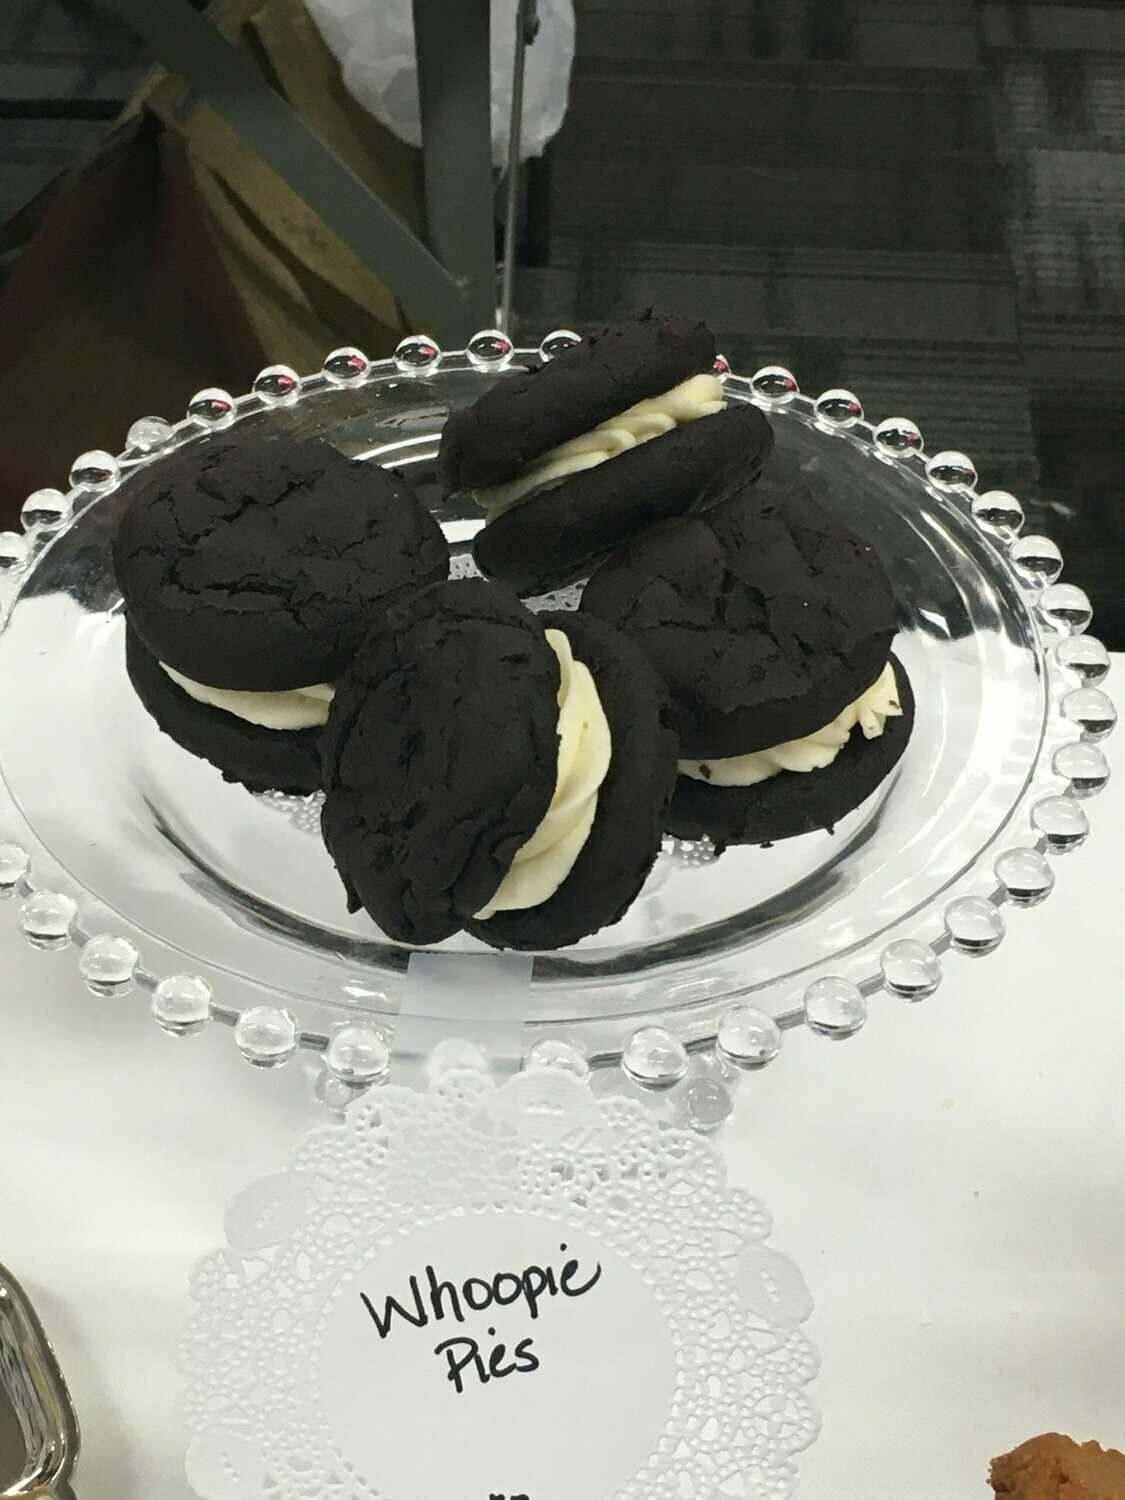 CLASSIC MARSHMALLOW WHOOPIE PIES